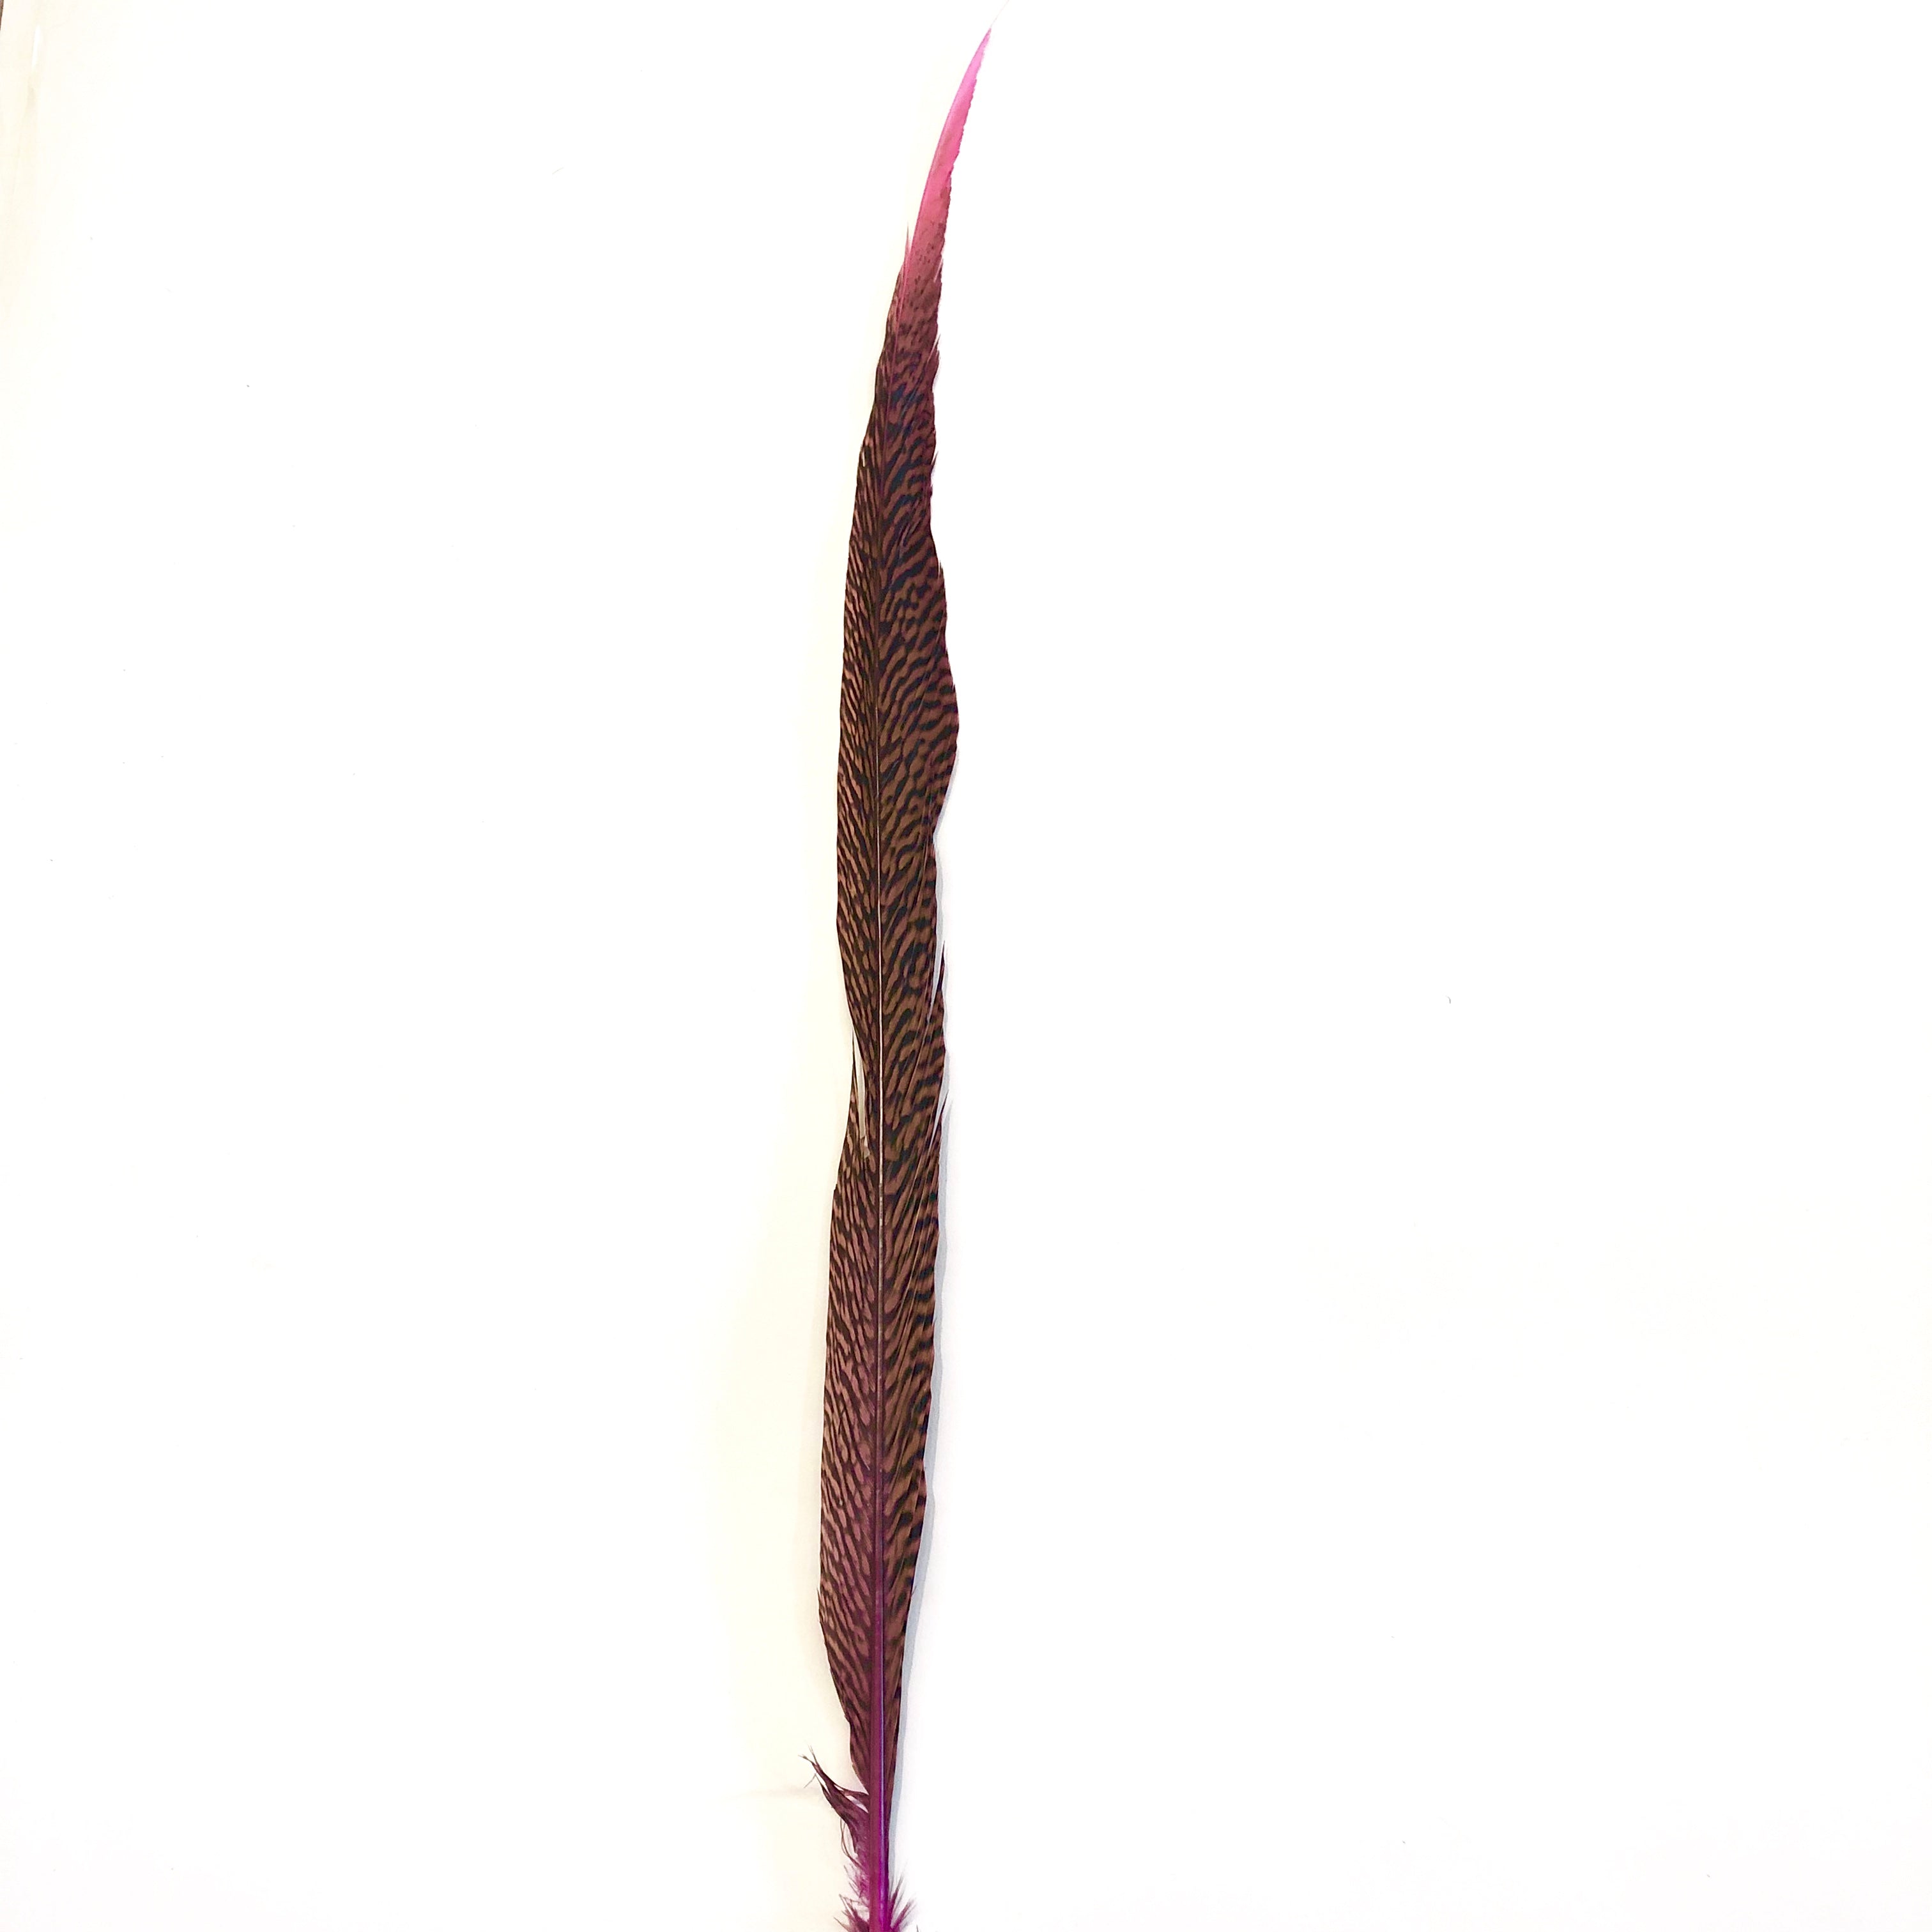 10" to 20" Golden Pheasant Side Tail Feather - Hot Pink